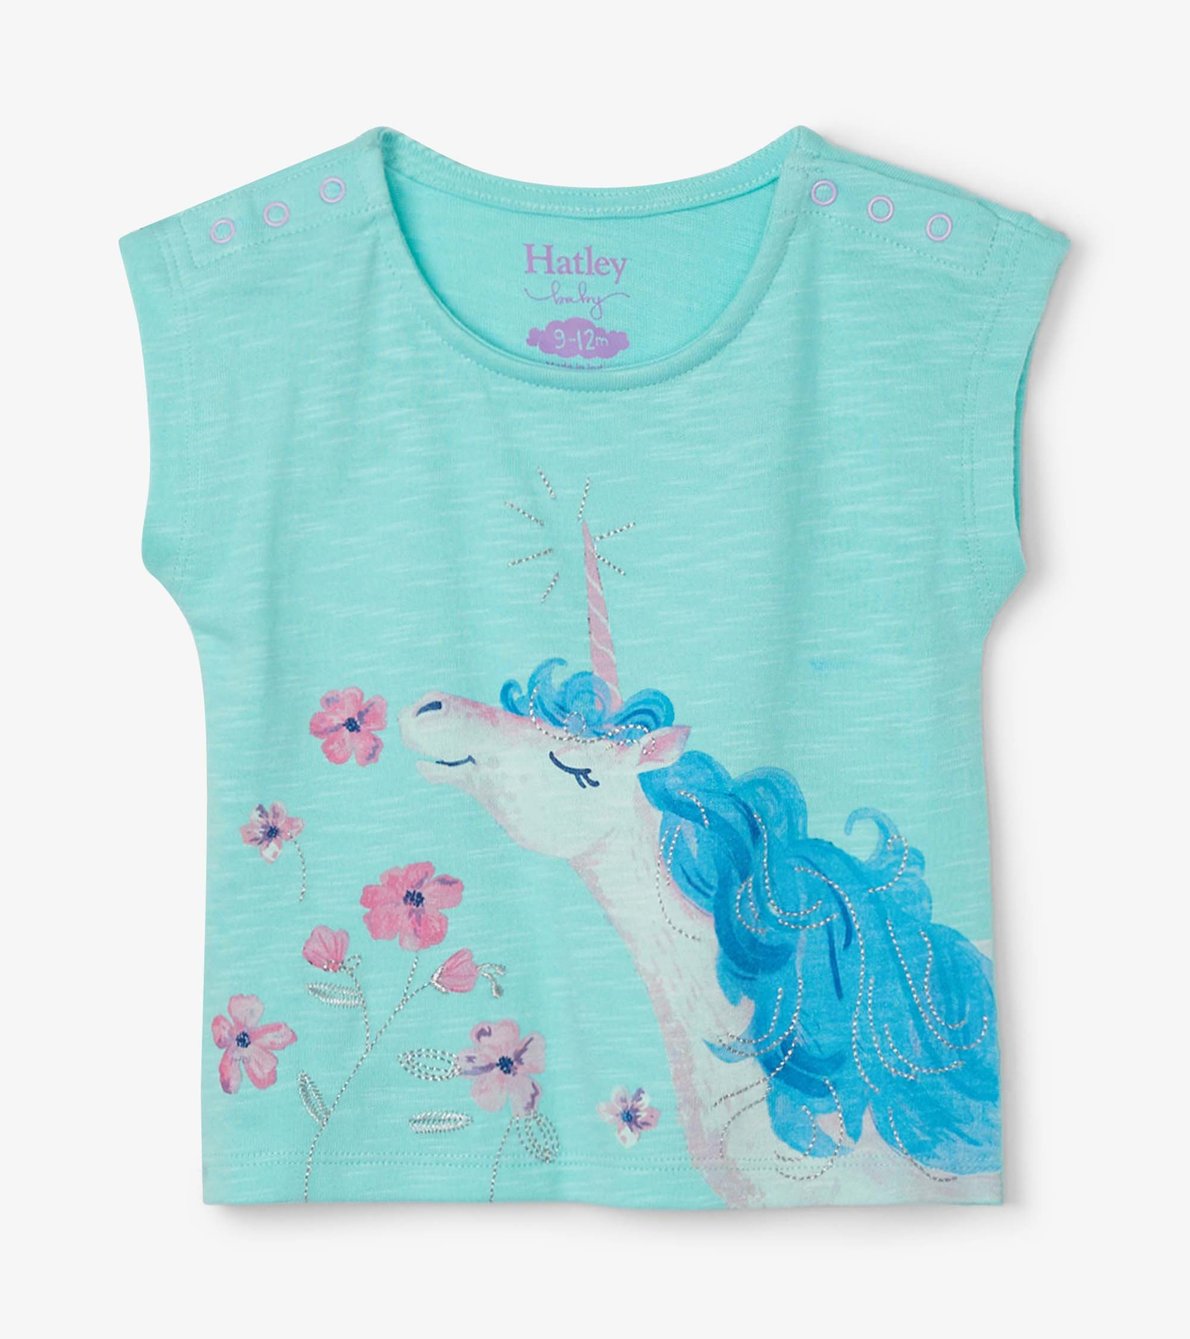 View larger image of Dreamy Unicorn Baby Tee